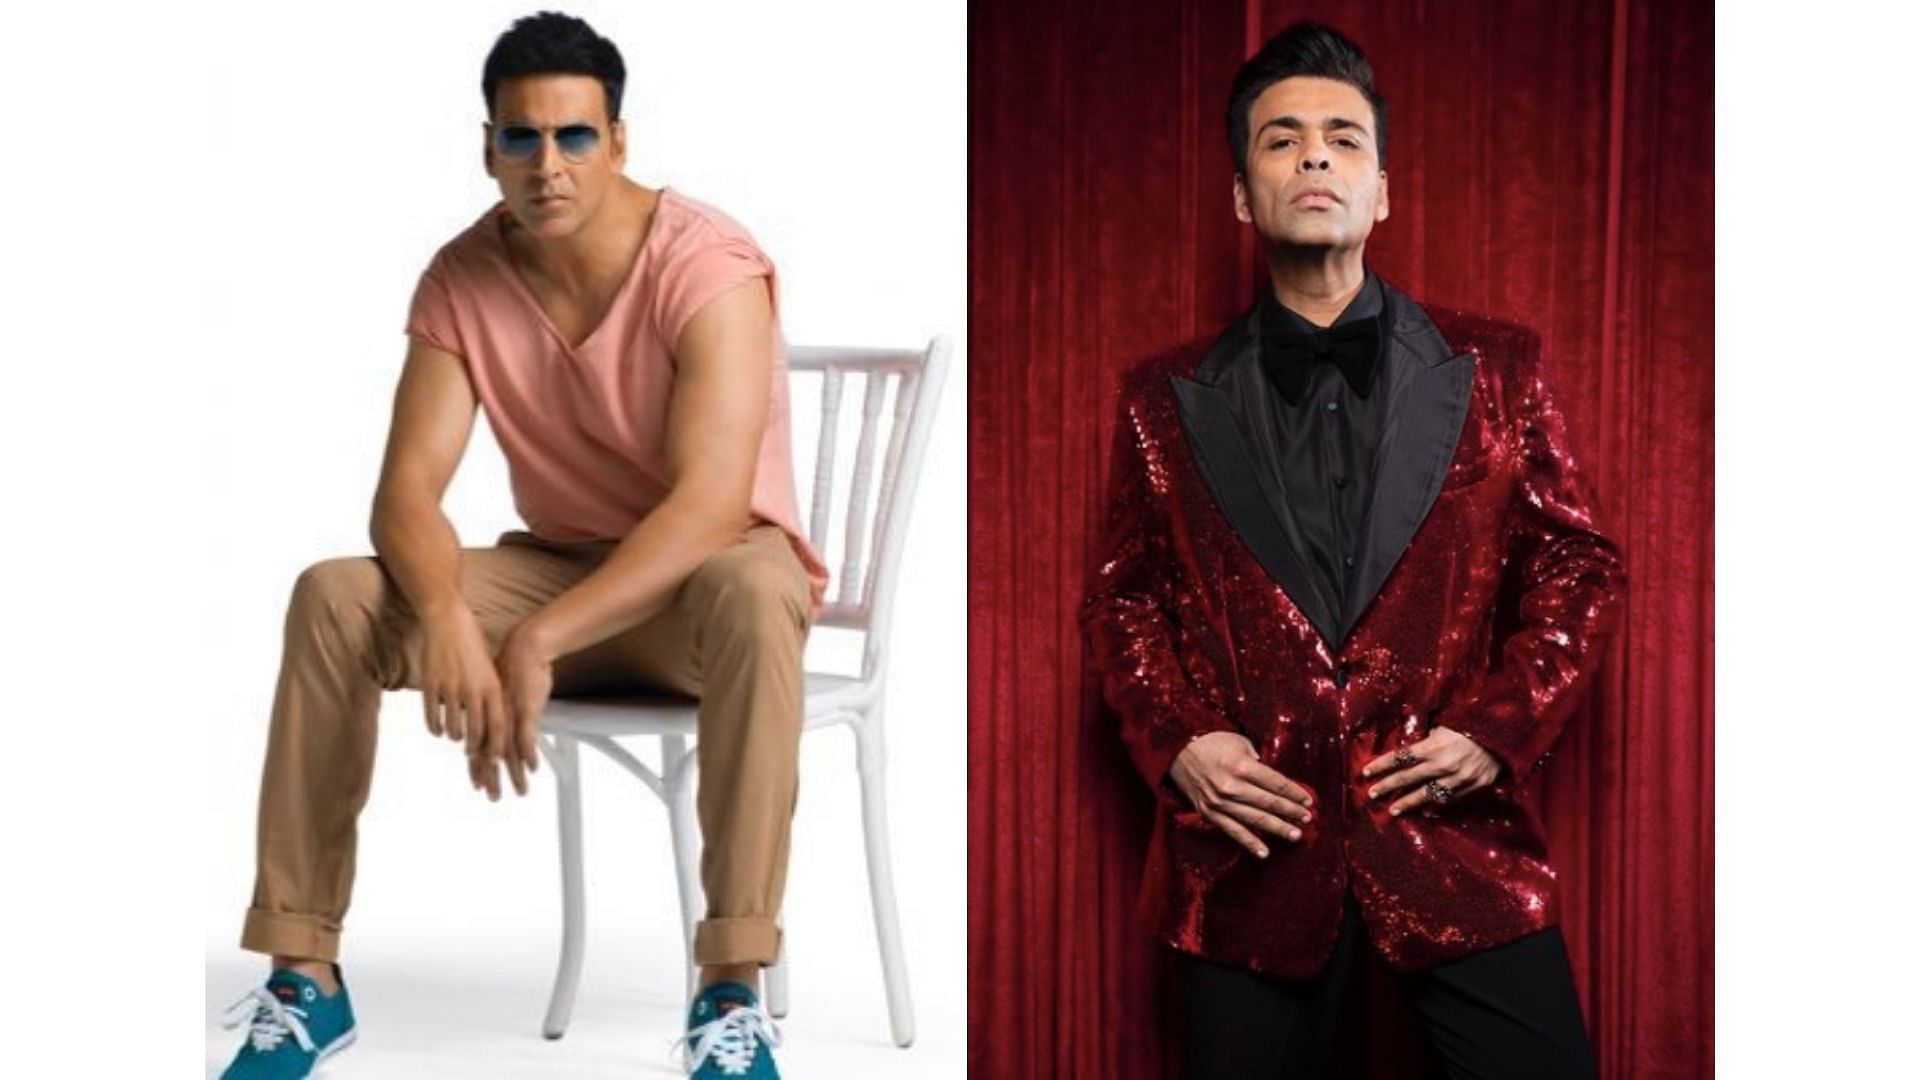 Akshay Kumar and Karan Johar are among a few celebs who have tweeted out the government’s stand on the farmers’ protests.